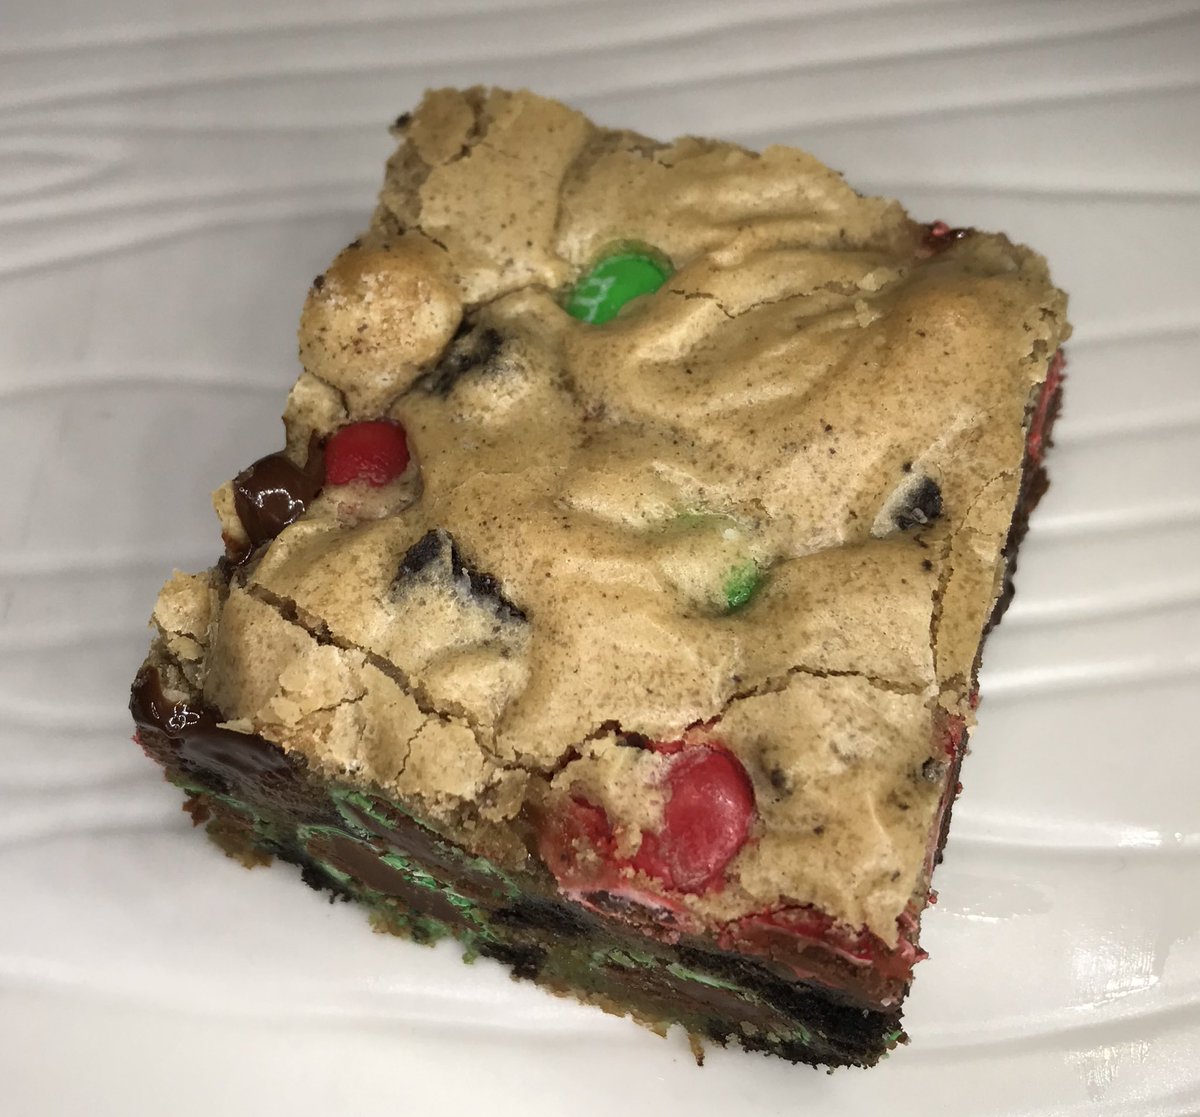 December’s Cookie of the Month is our Holiday Blondie. Loaded with red and green M&Ms, Oreos and chocolate chips, it will keep you coming back for more. Order some today and find out for yourself!